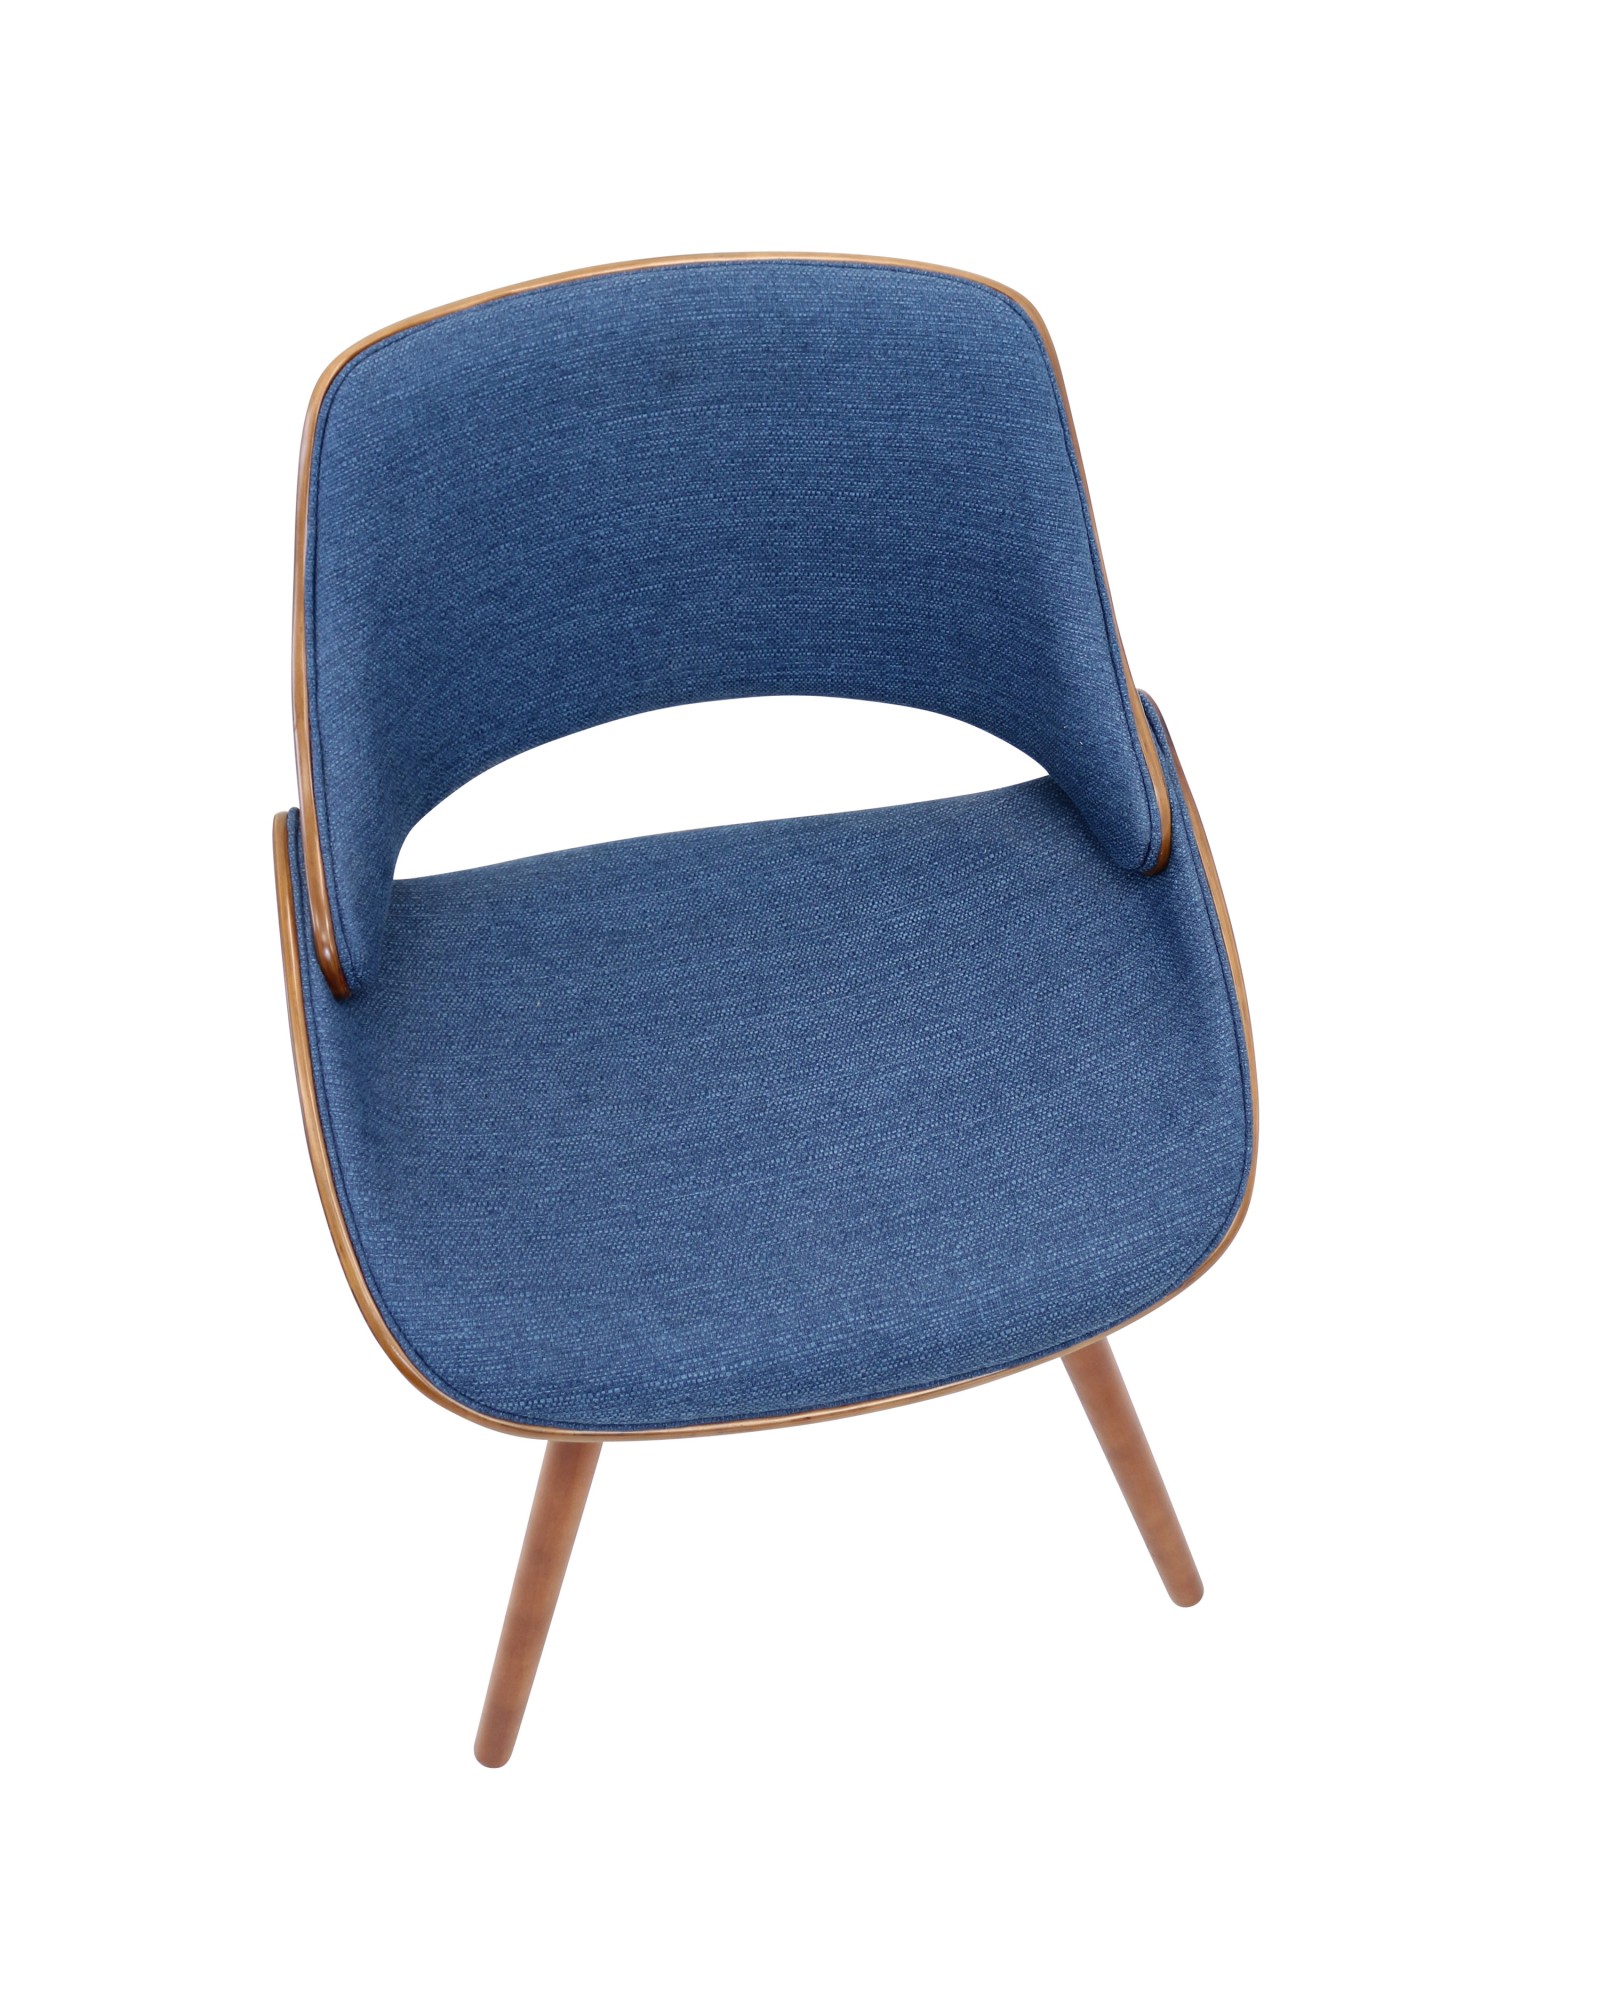 Fabrizzi Mid-Century Modern Dining/Accent Chair in Walnut and Denim Blue